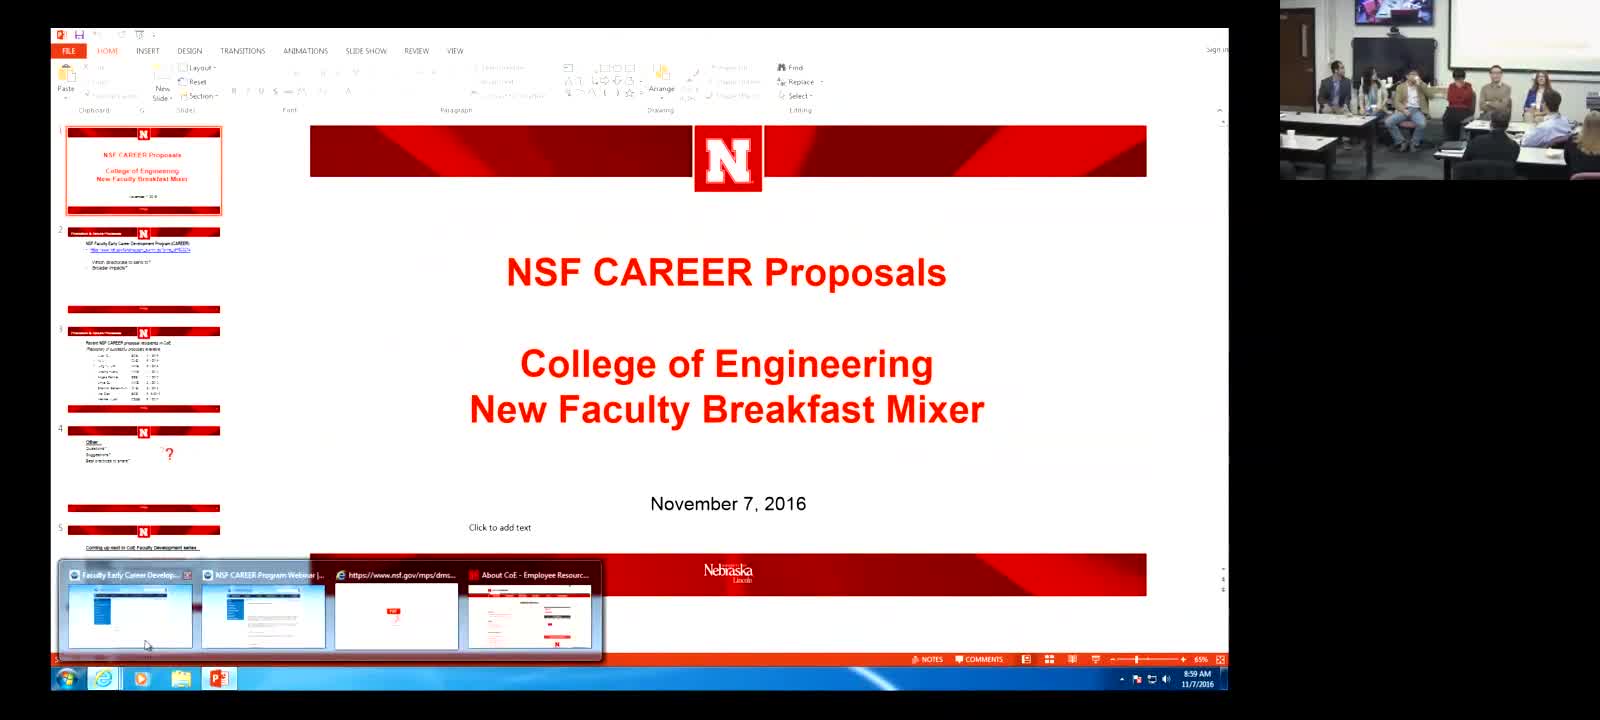 New Faculty Series: CAREER Proposal Panel Discussion